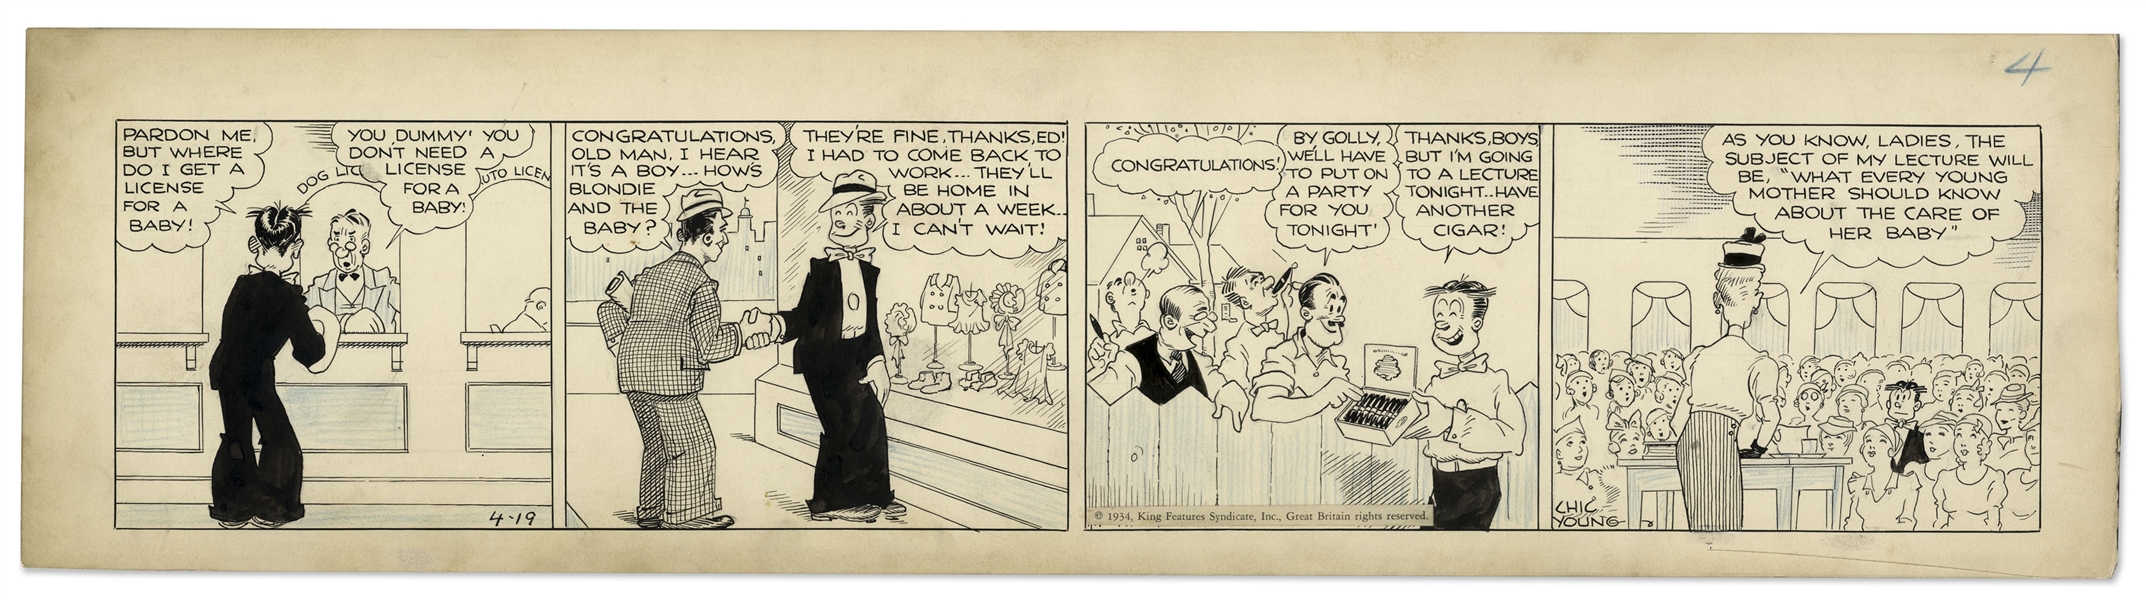 Chic Young Hand-Drawn ''Blondie'' Comic Strip From 1934 Titled ''One Man In A Thousand'' -- Dagwood & Blondie Have a New Baby Boy!